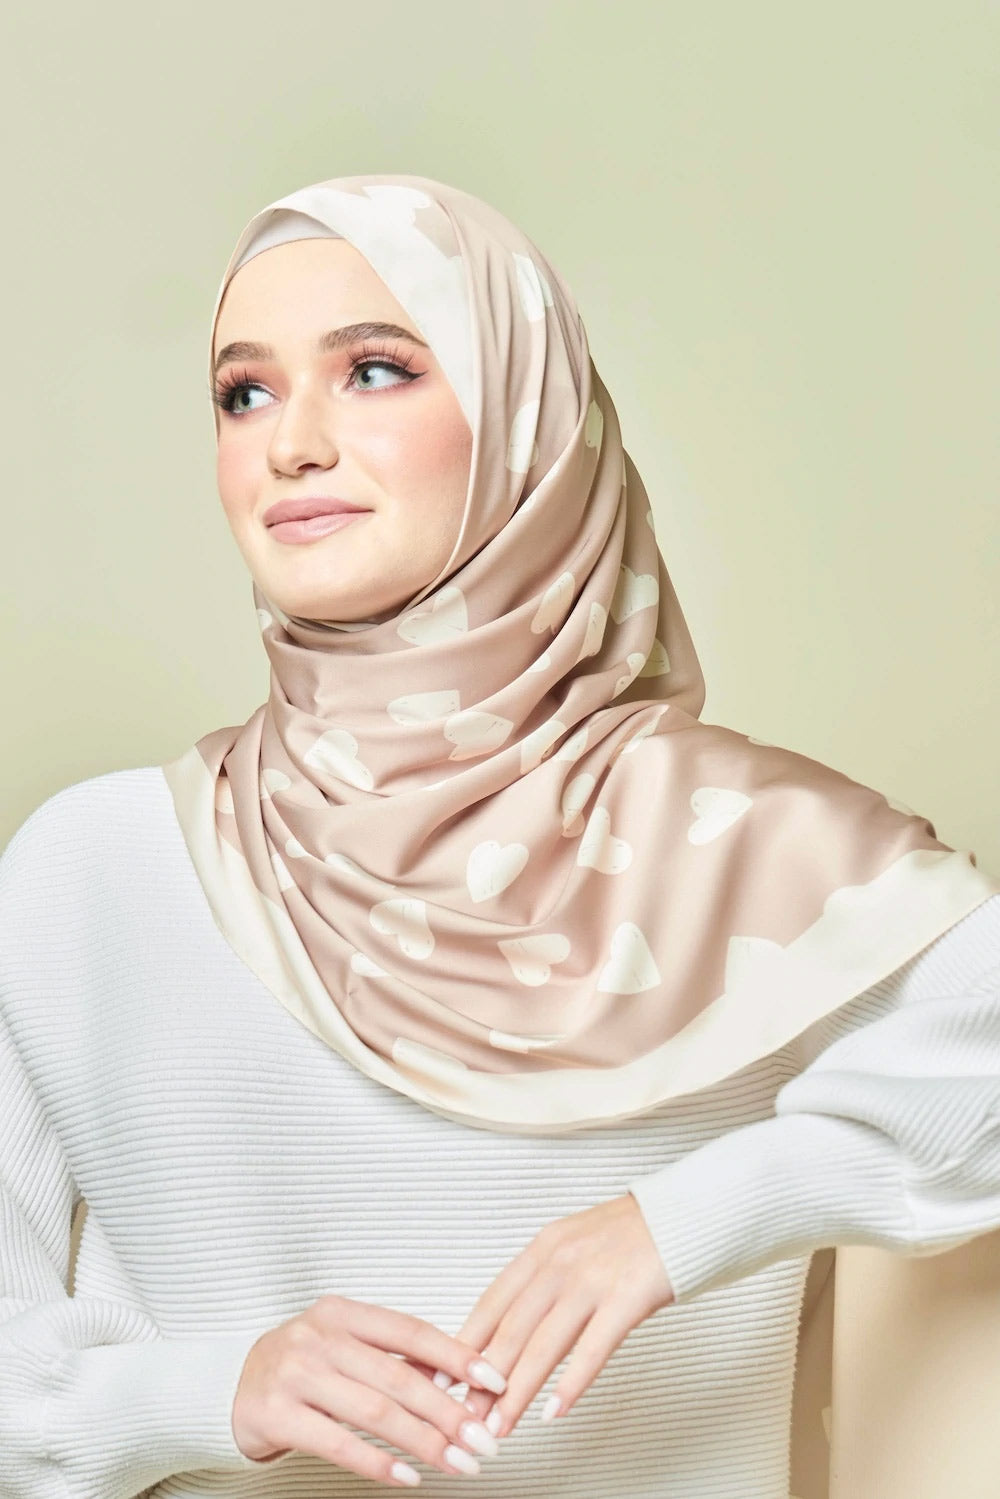 Beige heart patterned hijab on a model  top rated for modest fashion and stylish headscarves